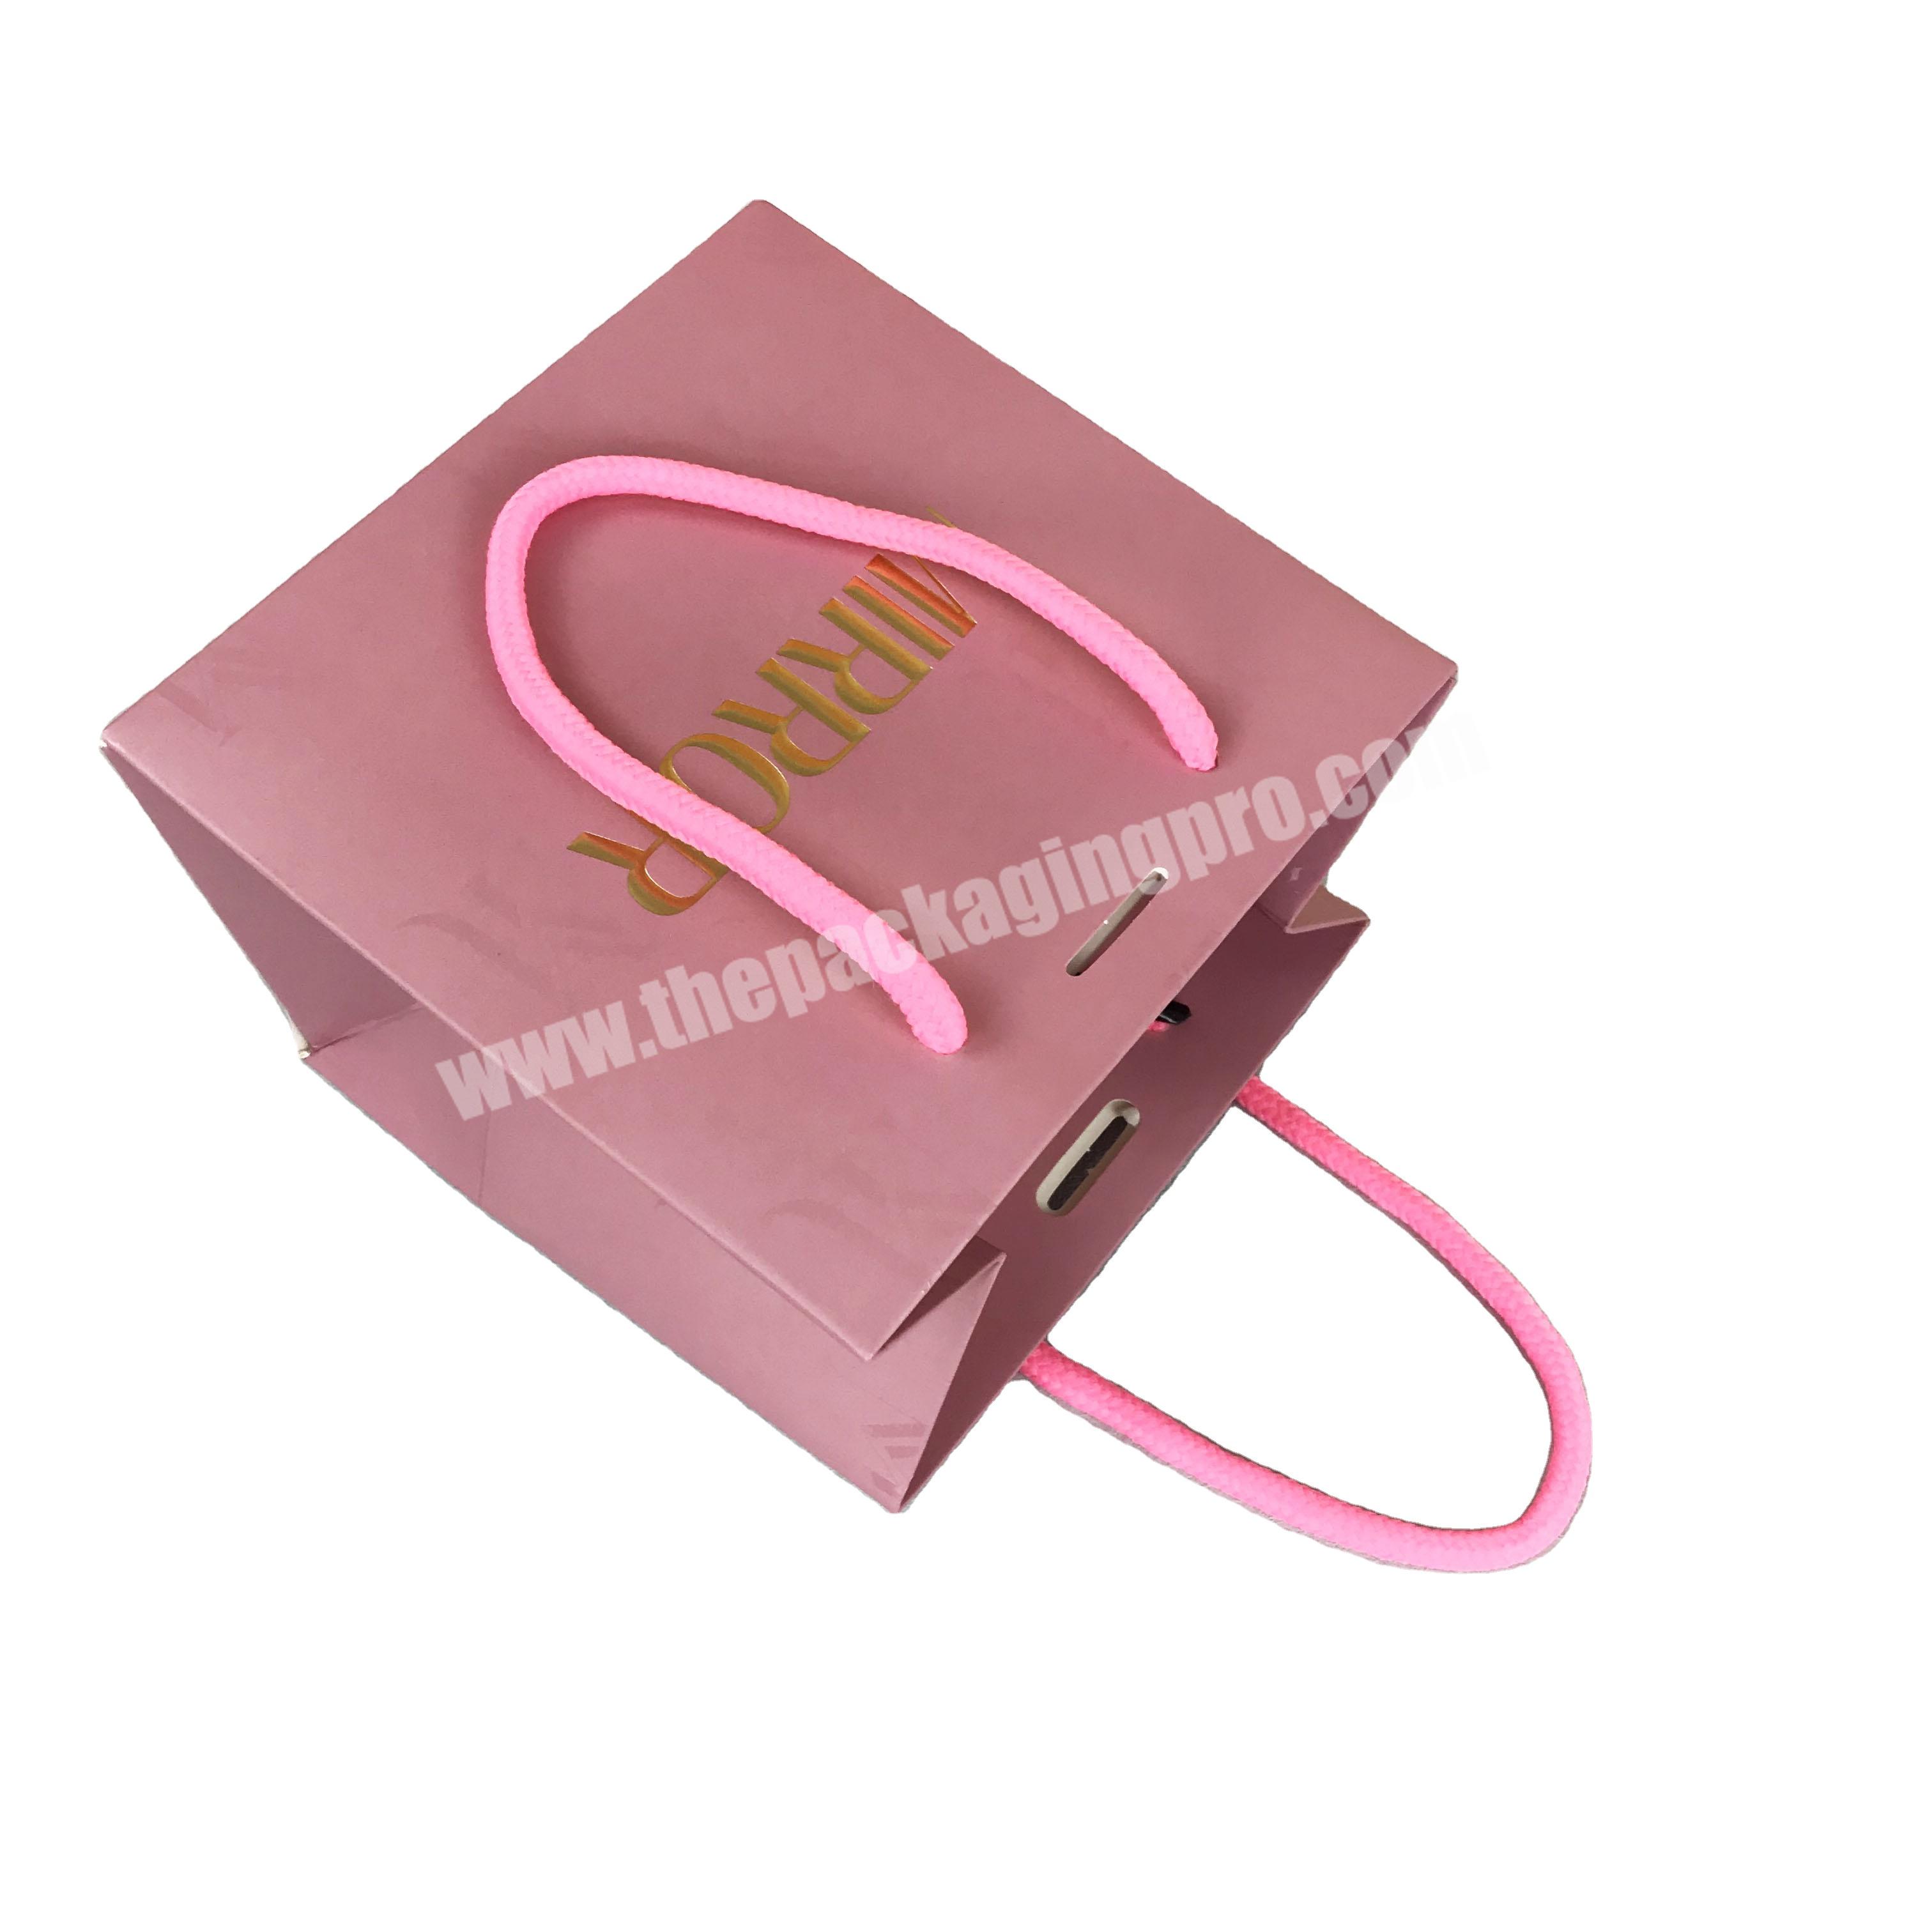 Lipack Brand Name 250 grams Paper Bags Pink Thank You Shopping Garment Paper Bags With Your Own Logo